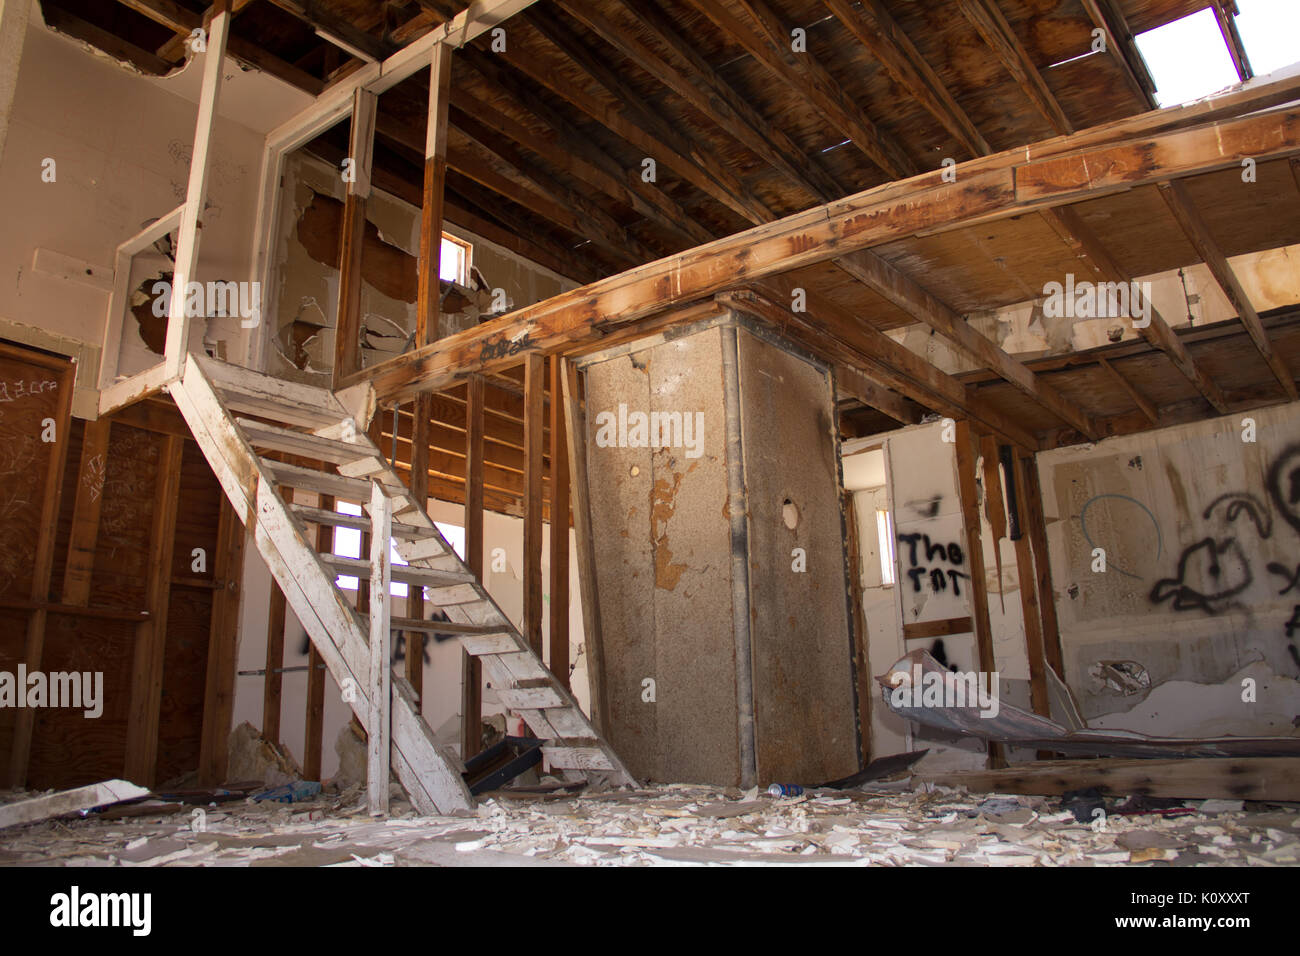 The interior of a destroyed building in the Nevada Desert Stock Photo